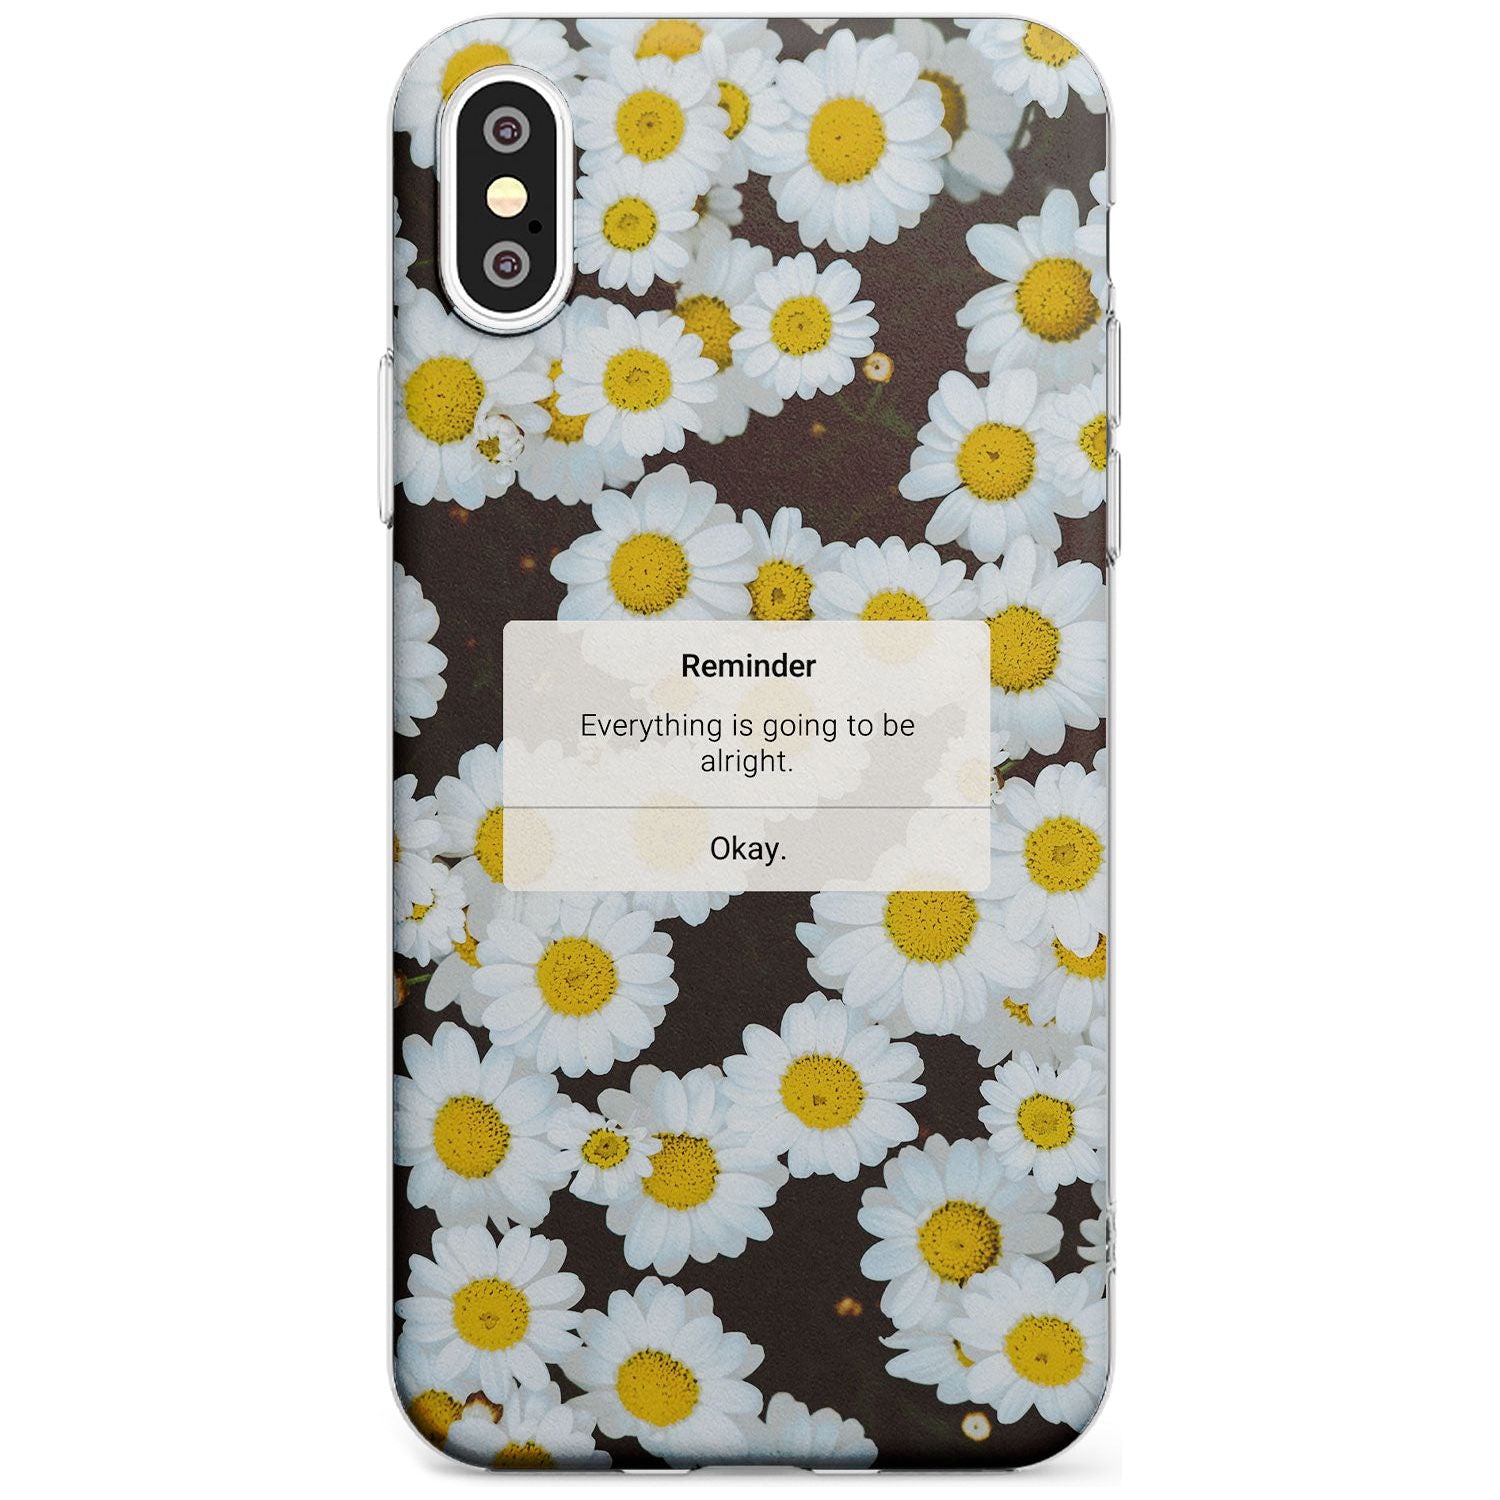 "Everything will be alright" iPhone Reminder Black Impact Phone Case for iPhone X XS Max XR